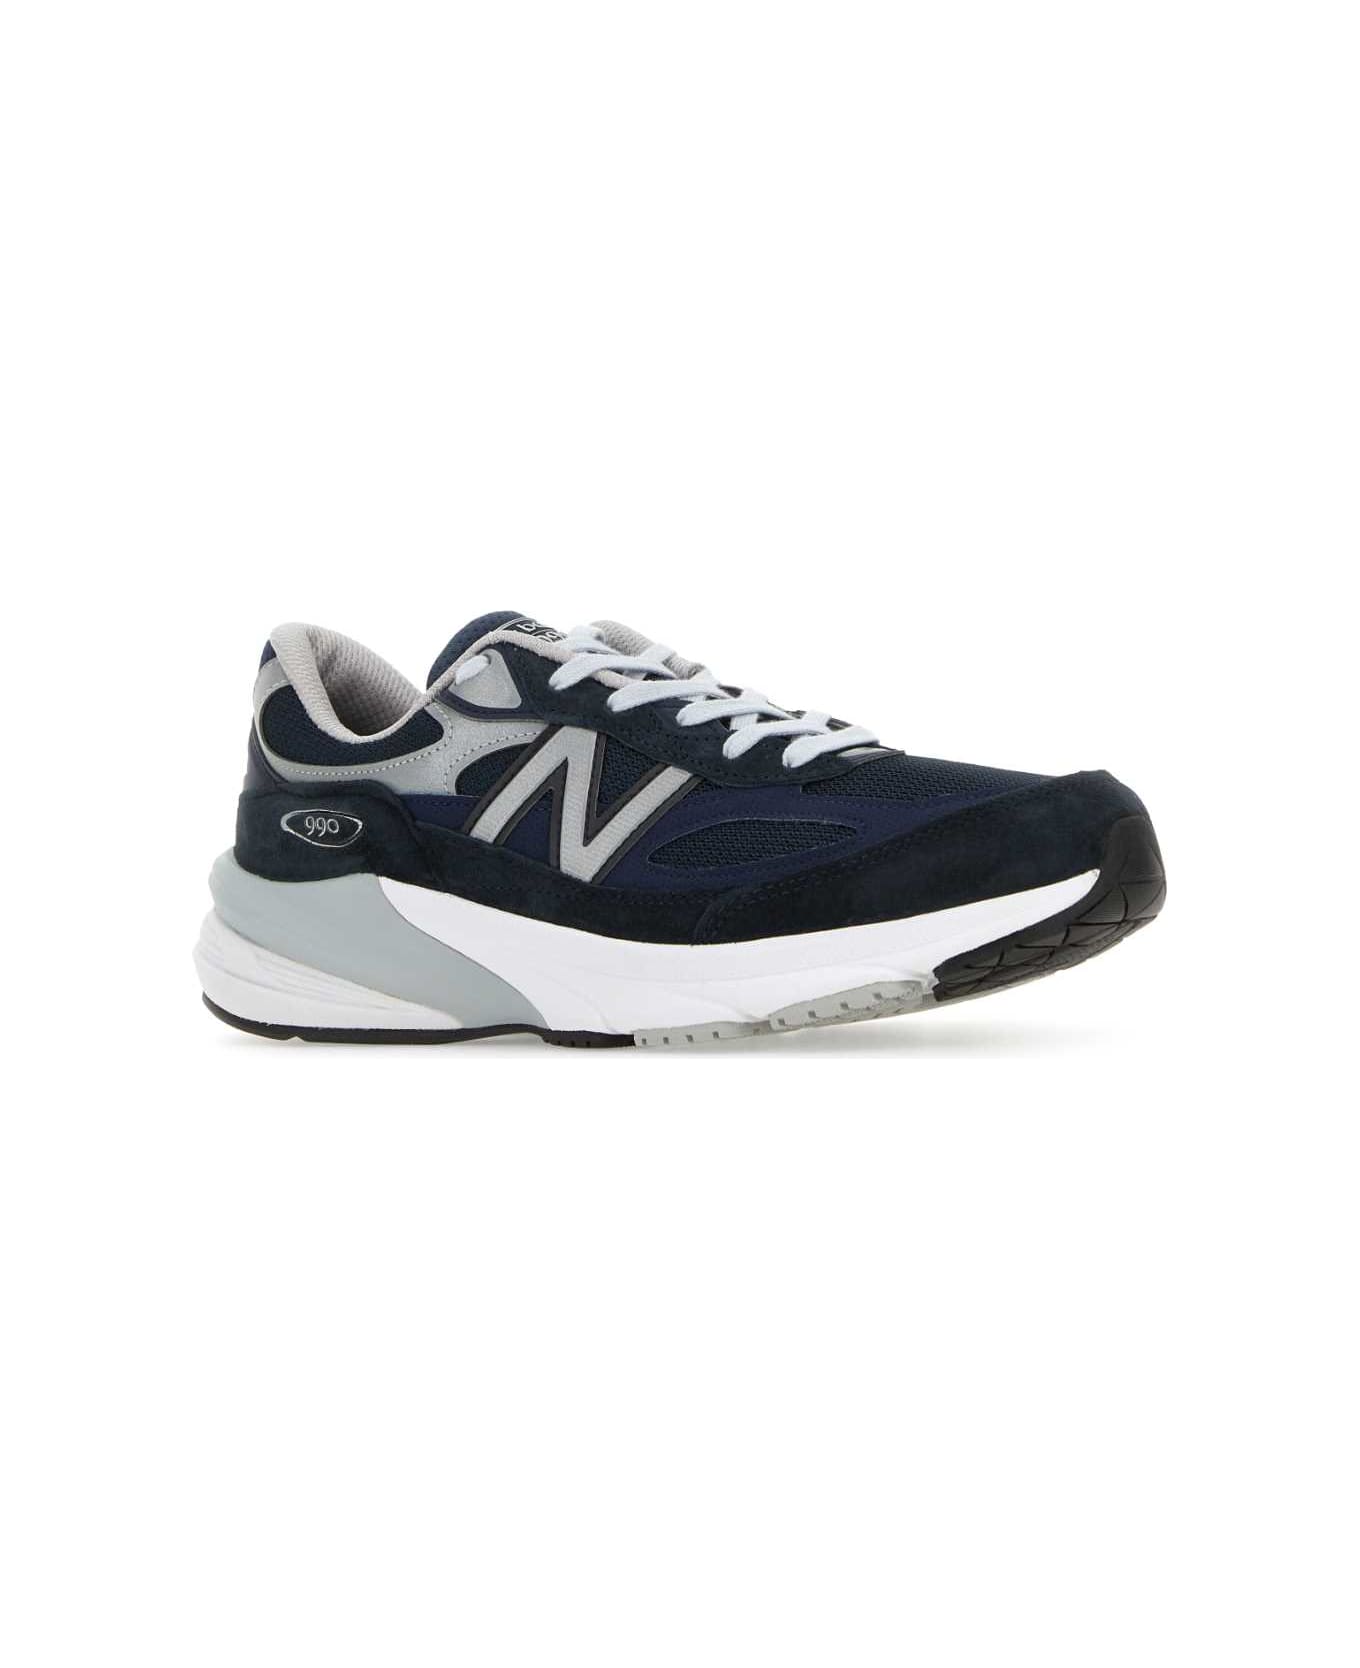 New Balance Two-tones 990v6 Sneakers - ECLIPSE スニーカー